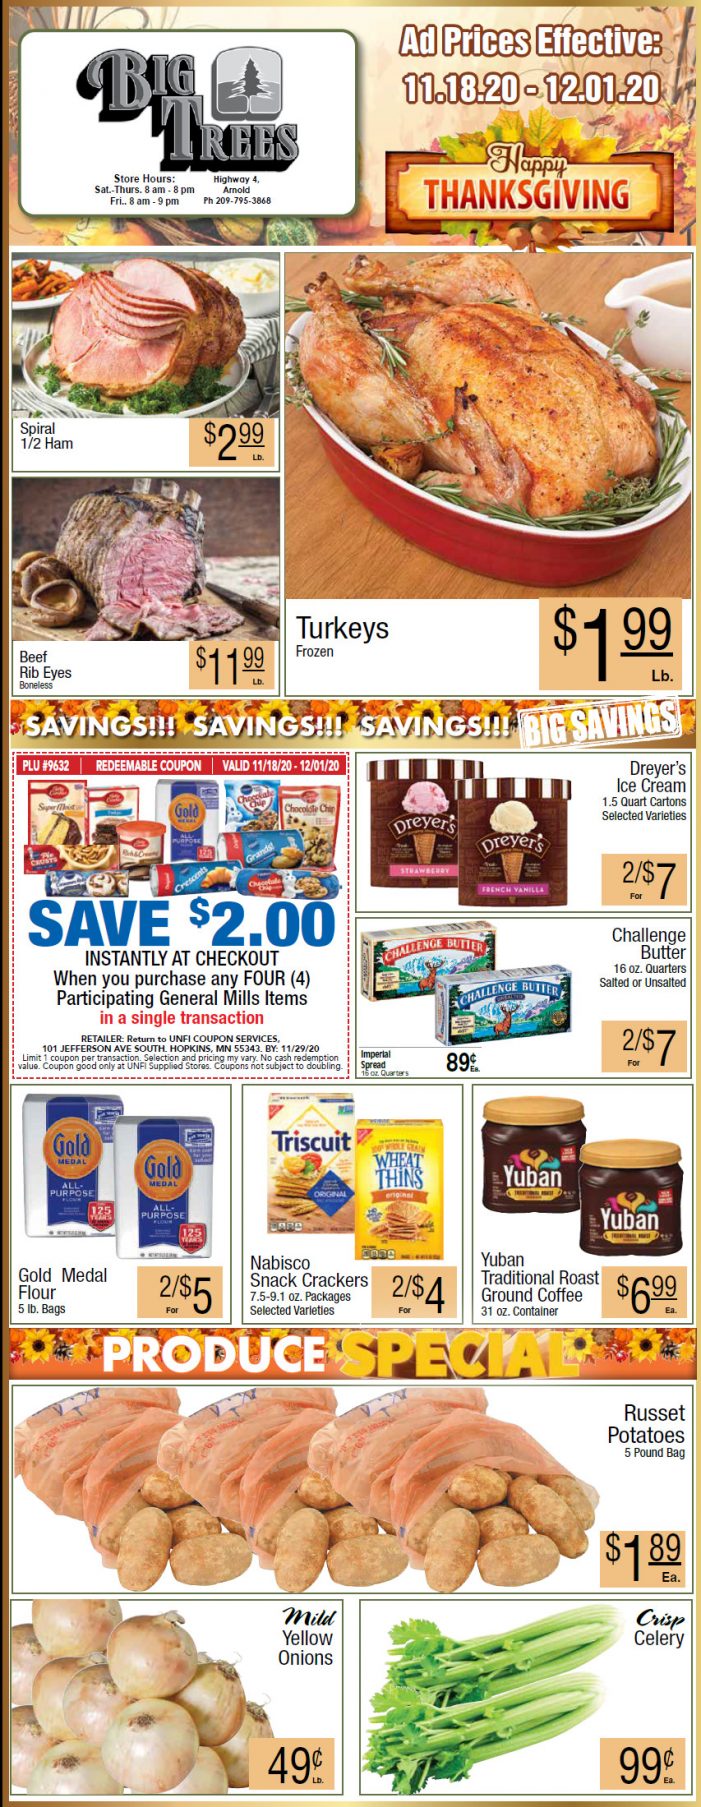 Big Trees Market Weekly Ad & Thanksgiving Specials Through December 1st